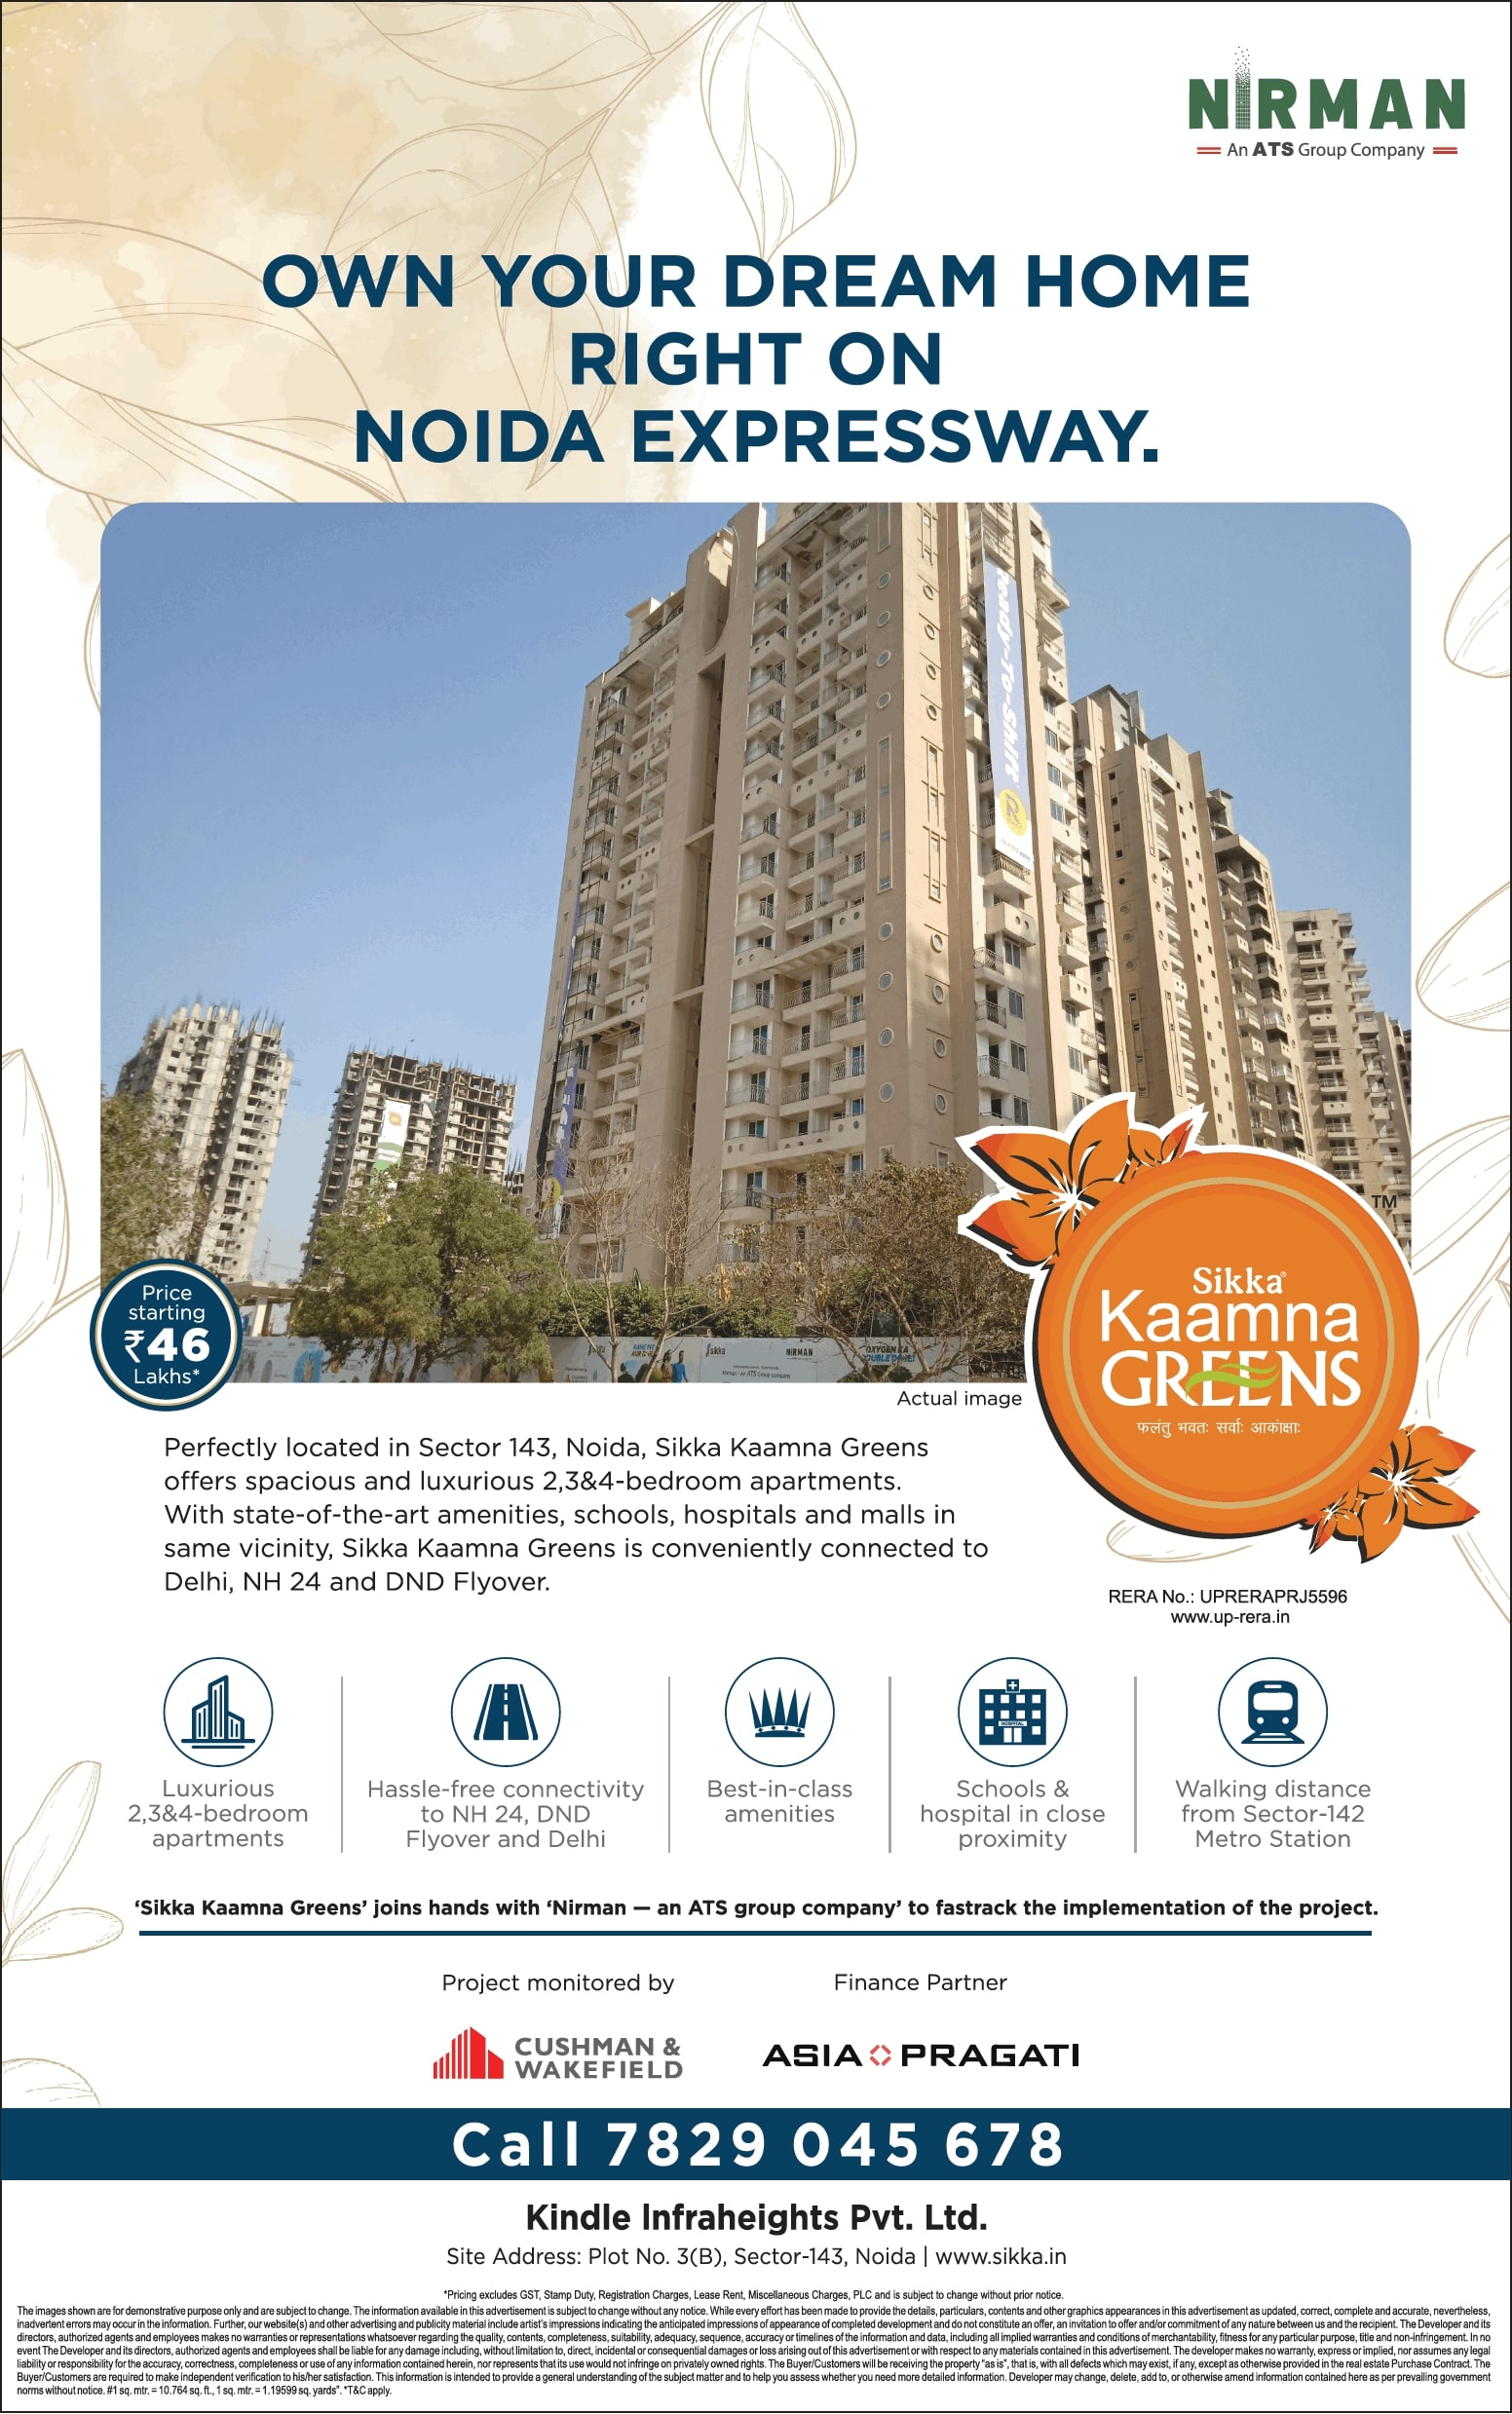 nirman-own-your-dream-home-right-on-noida-expressway-ad-delhi-times-09-04-2021